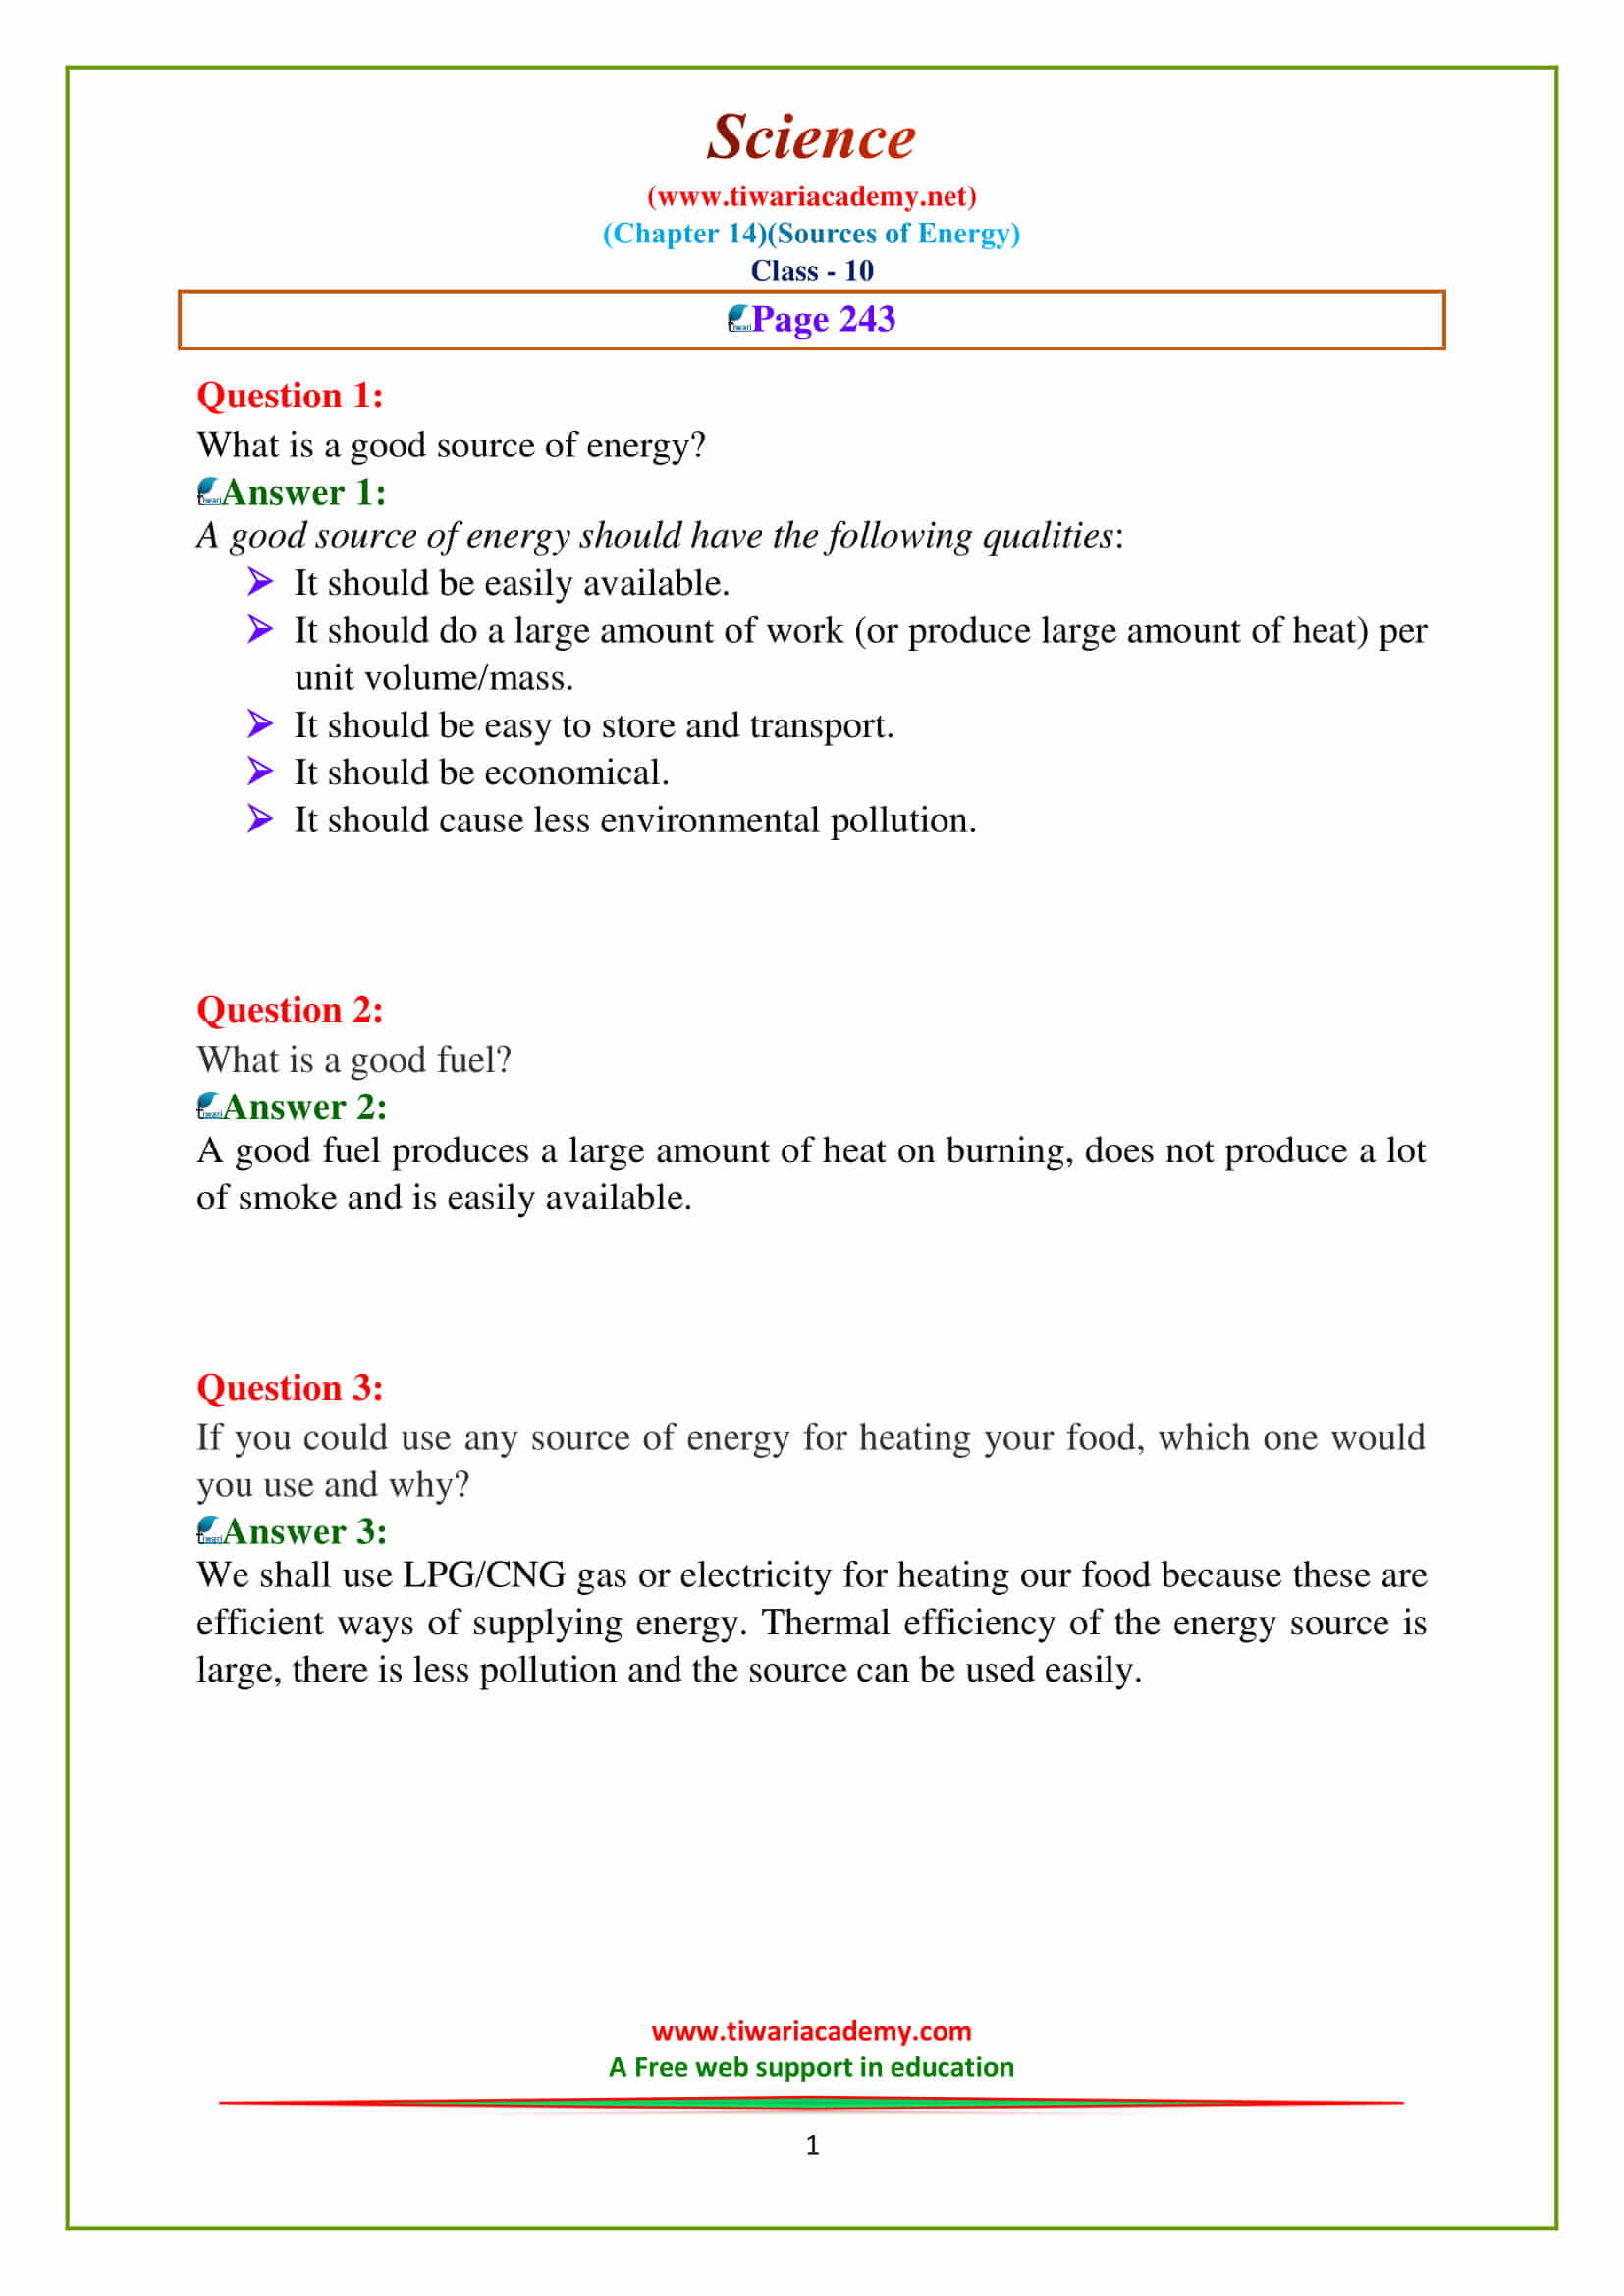 Class 10 Science Chapter 14 Sources of Energy page 243